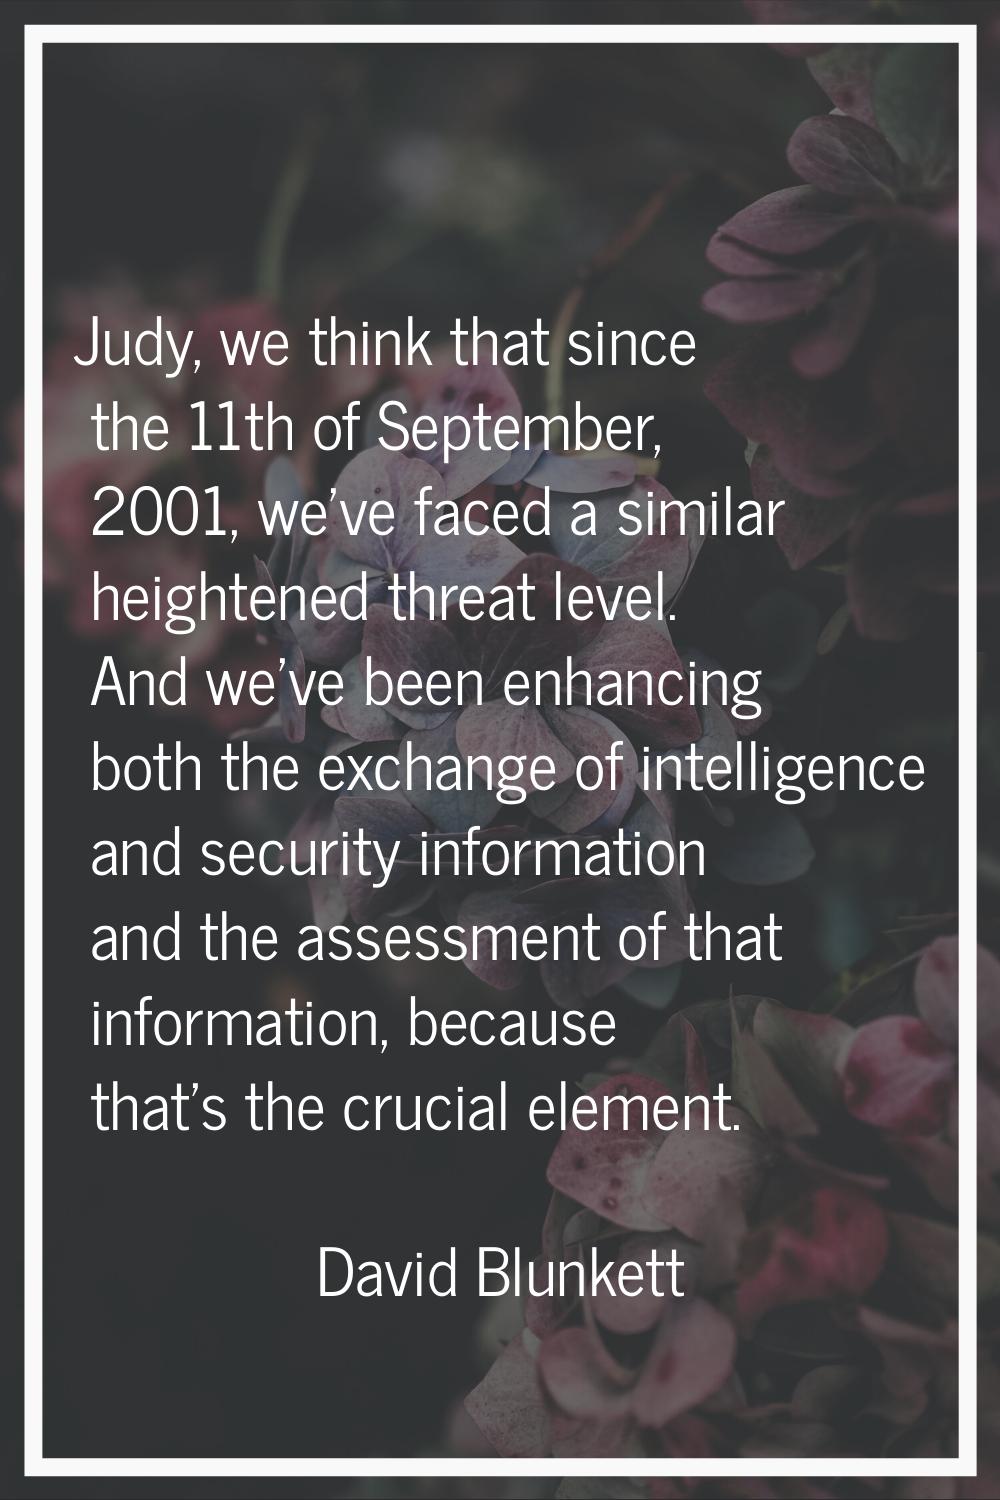 Judy, we think that since the 11th of September, 2001, we've faced a similar heightened threat leve